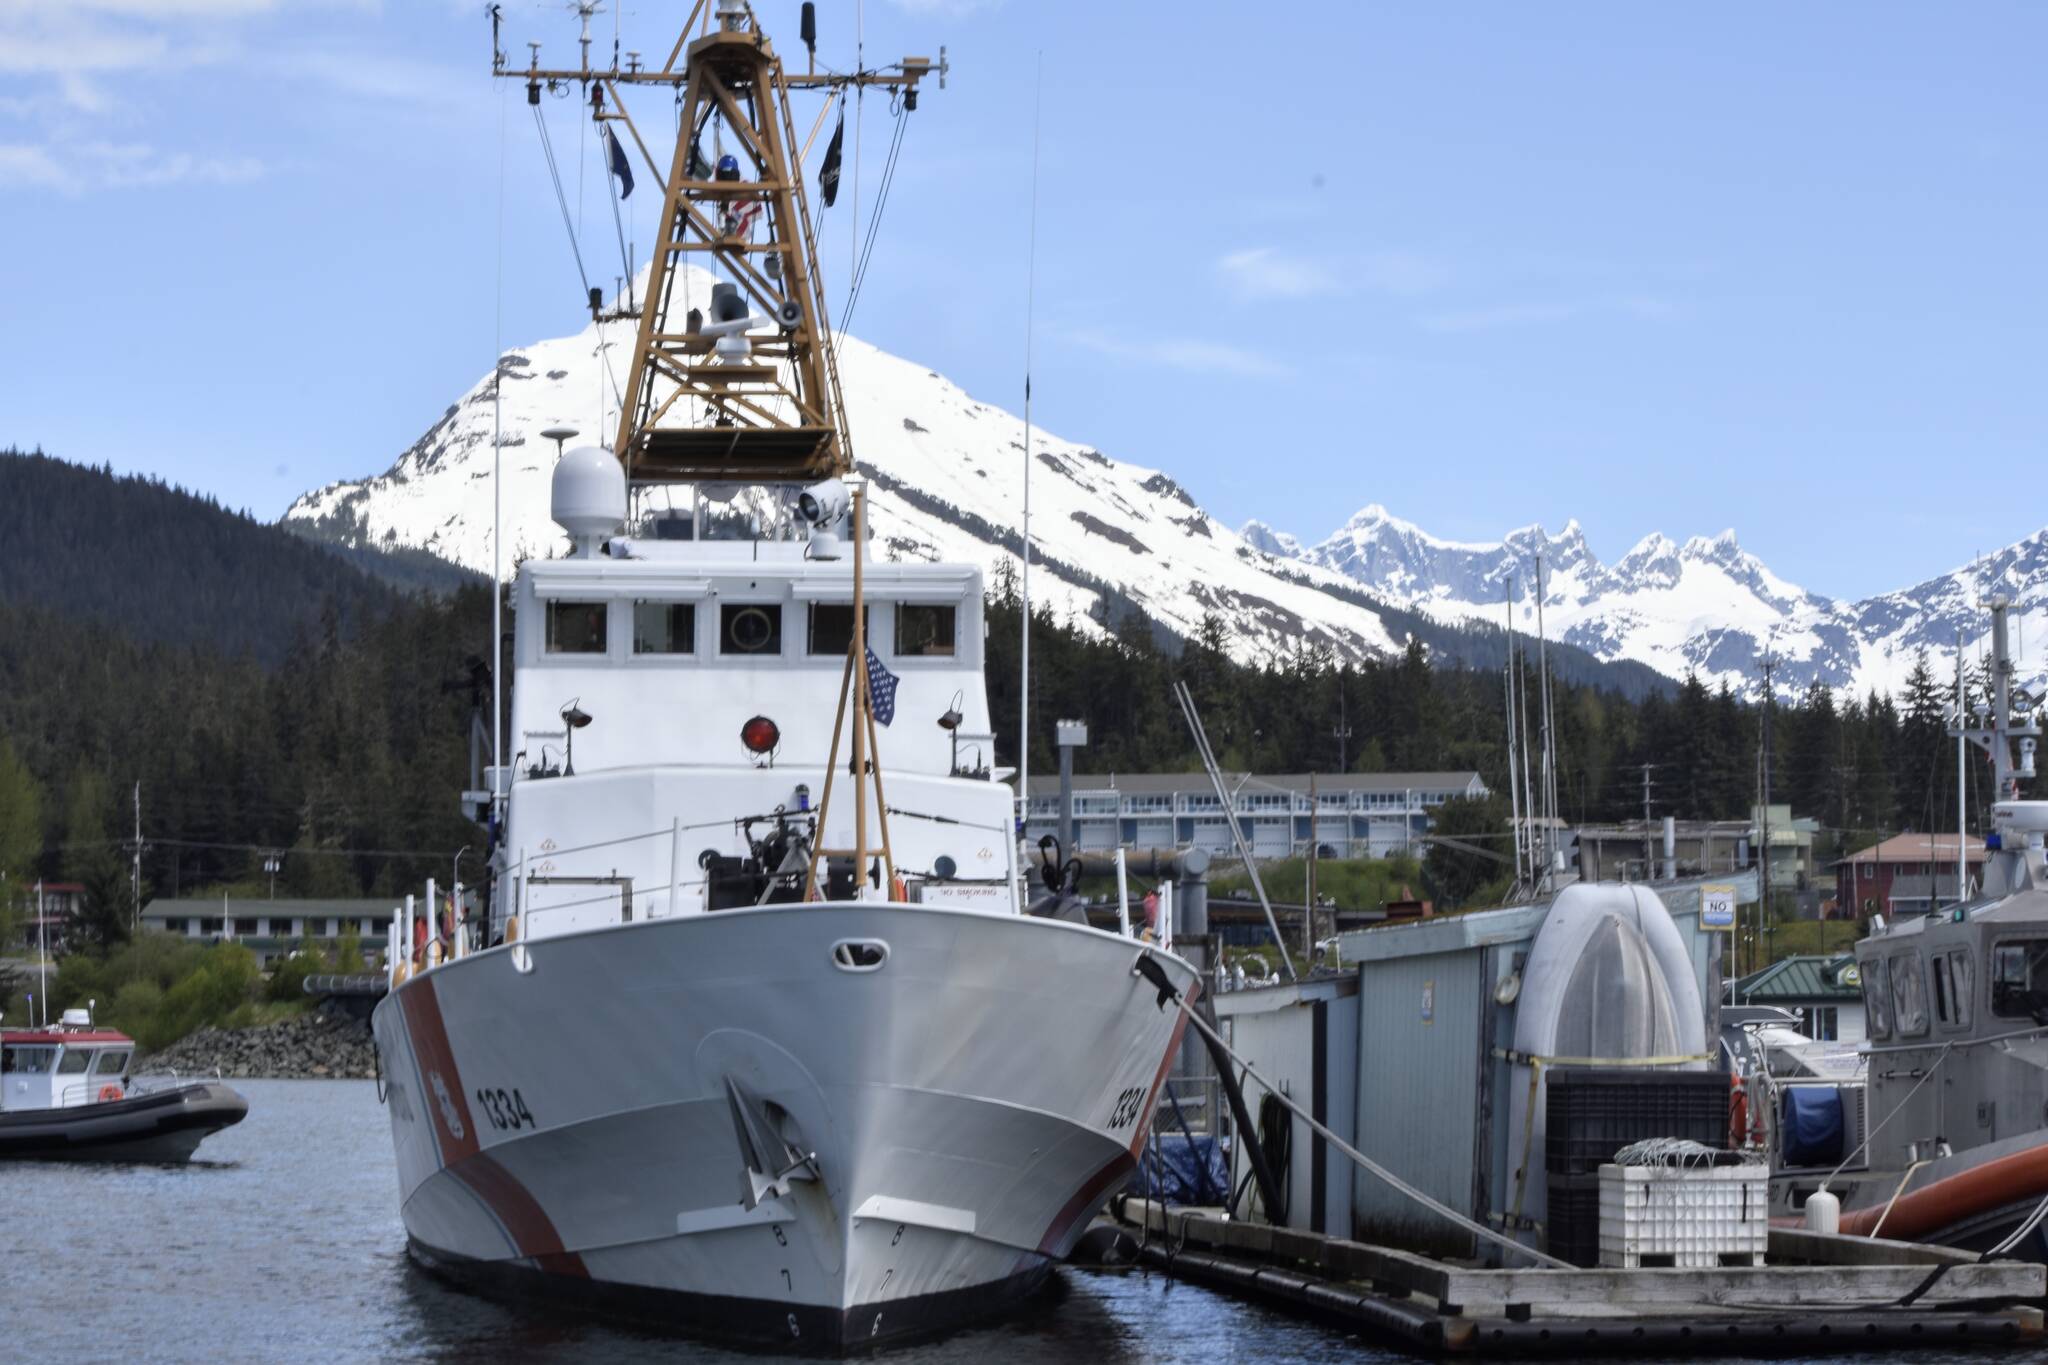 The U.S.C.G. cutter Liberty, homeported in Juneau for 33 years, is being re-homeported in Valdez, and as a send-off to the community the ship was open for tours on Thursday, May 26, 2022. (Peter Segall / Juneau Empire)